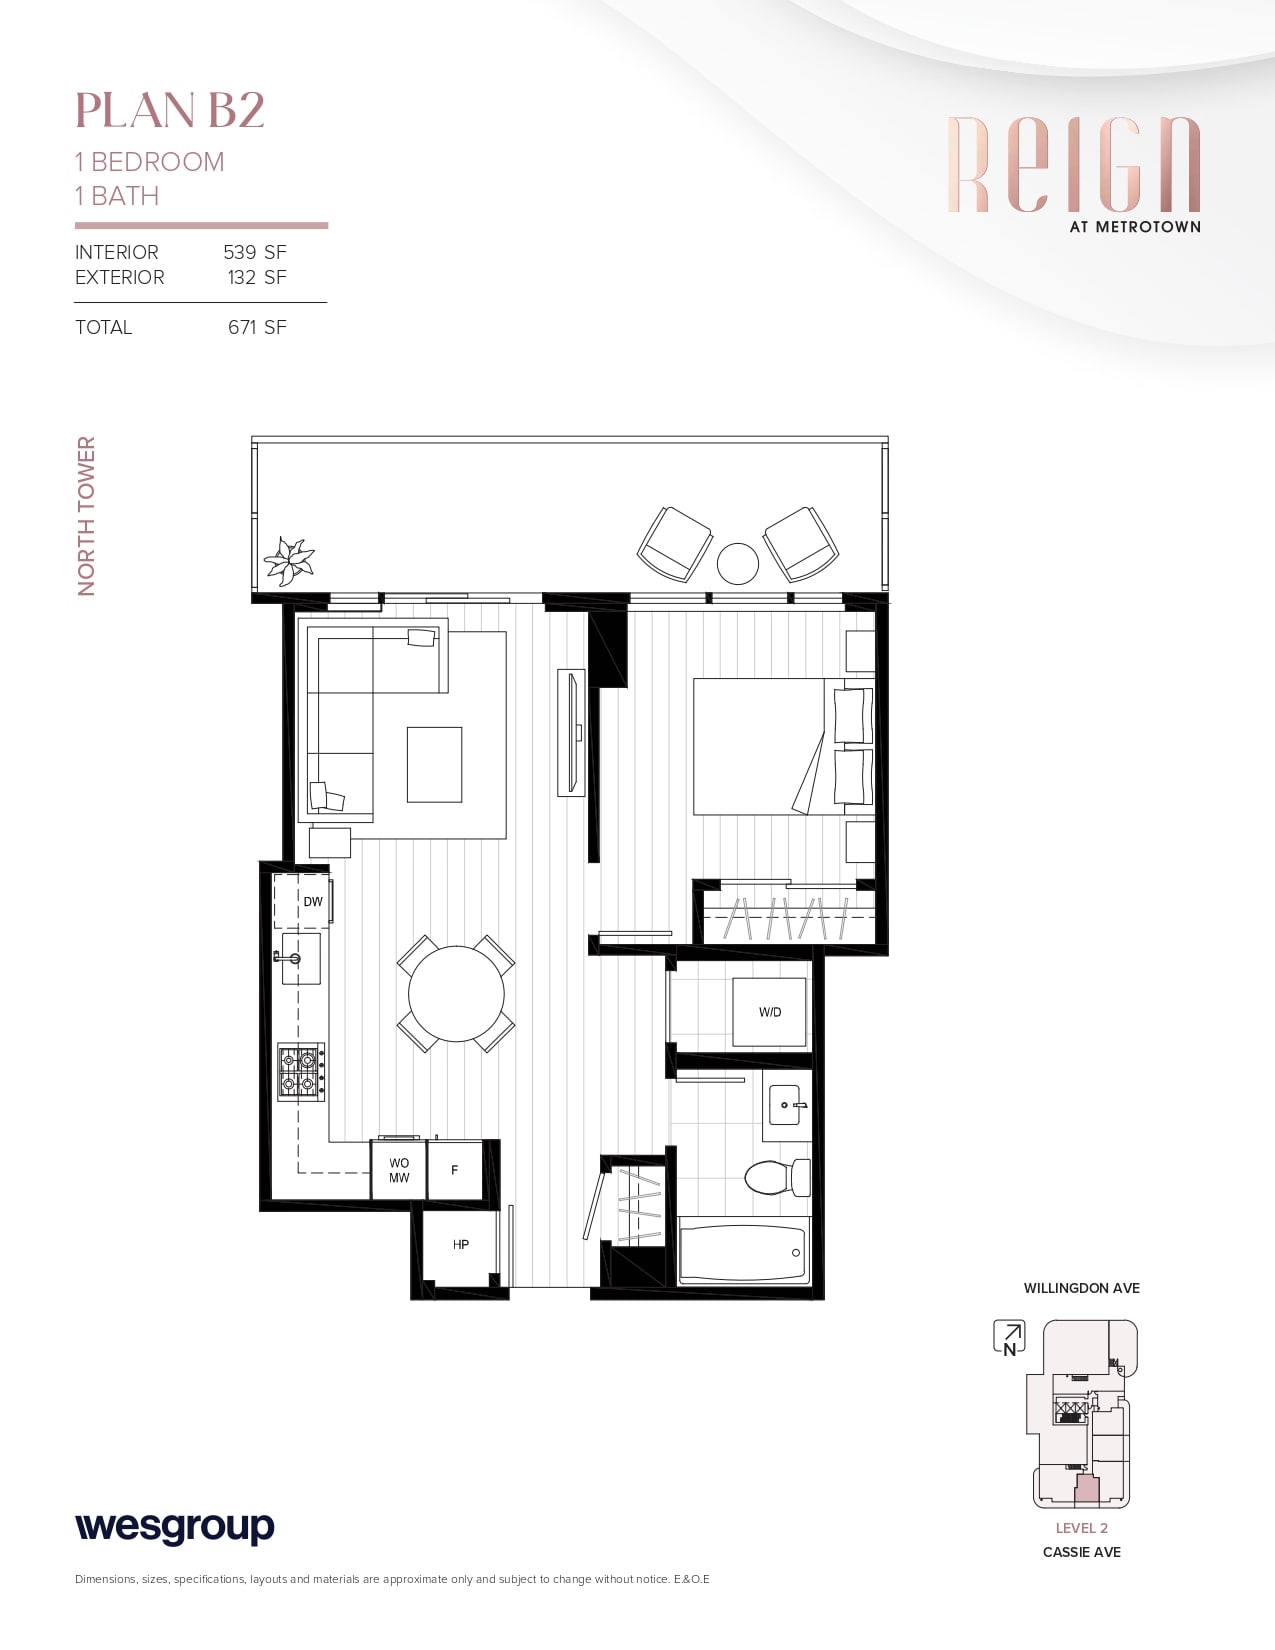 Reign_-_North_Tower_-_Typical_Floorplans_-_FINAL__page-0004-min.jpg